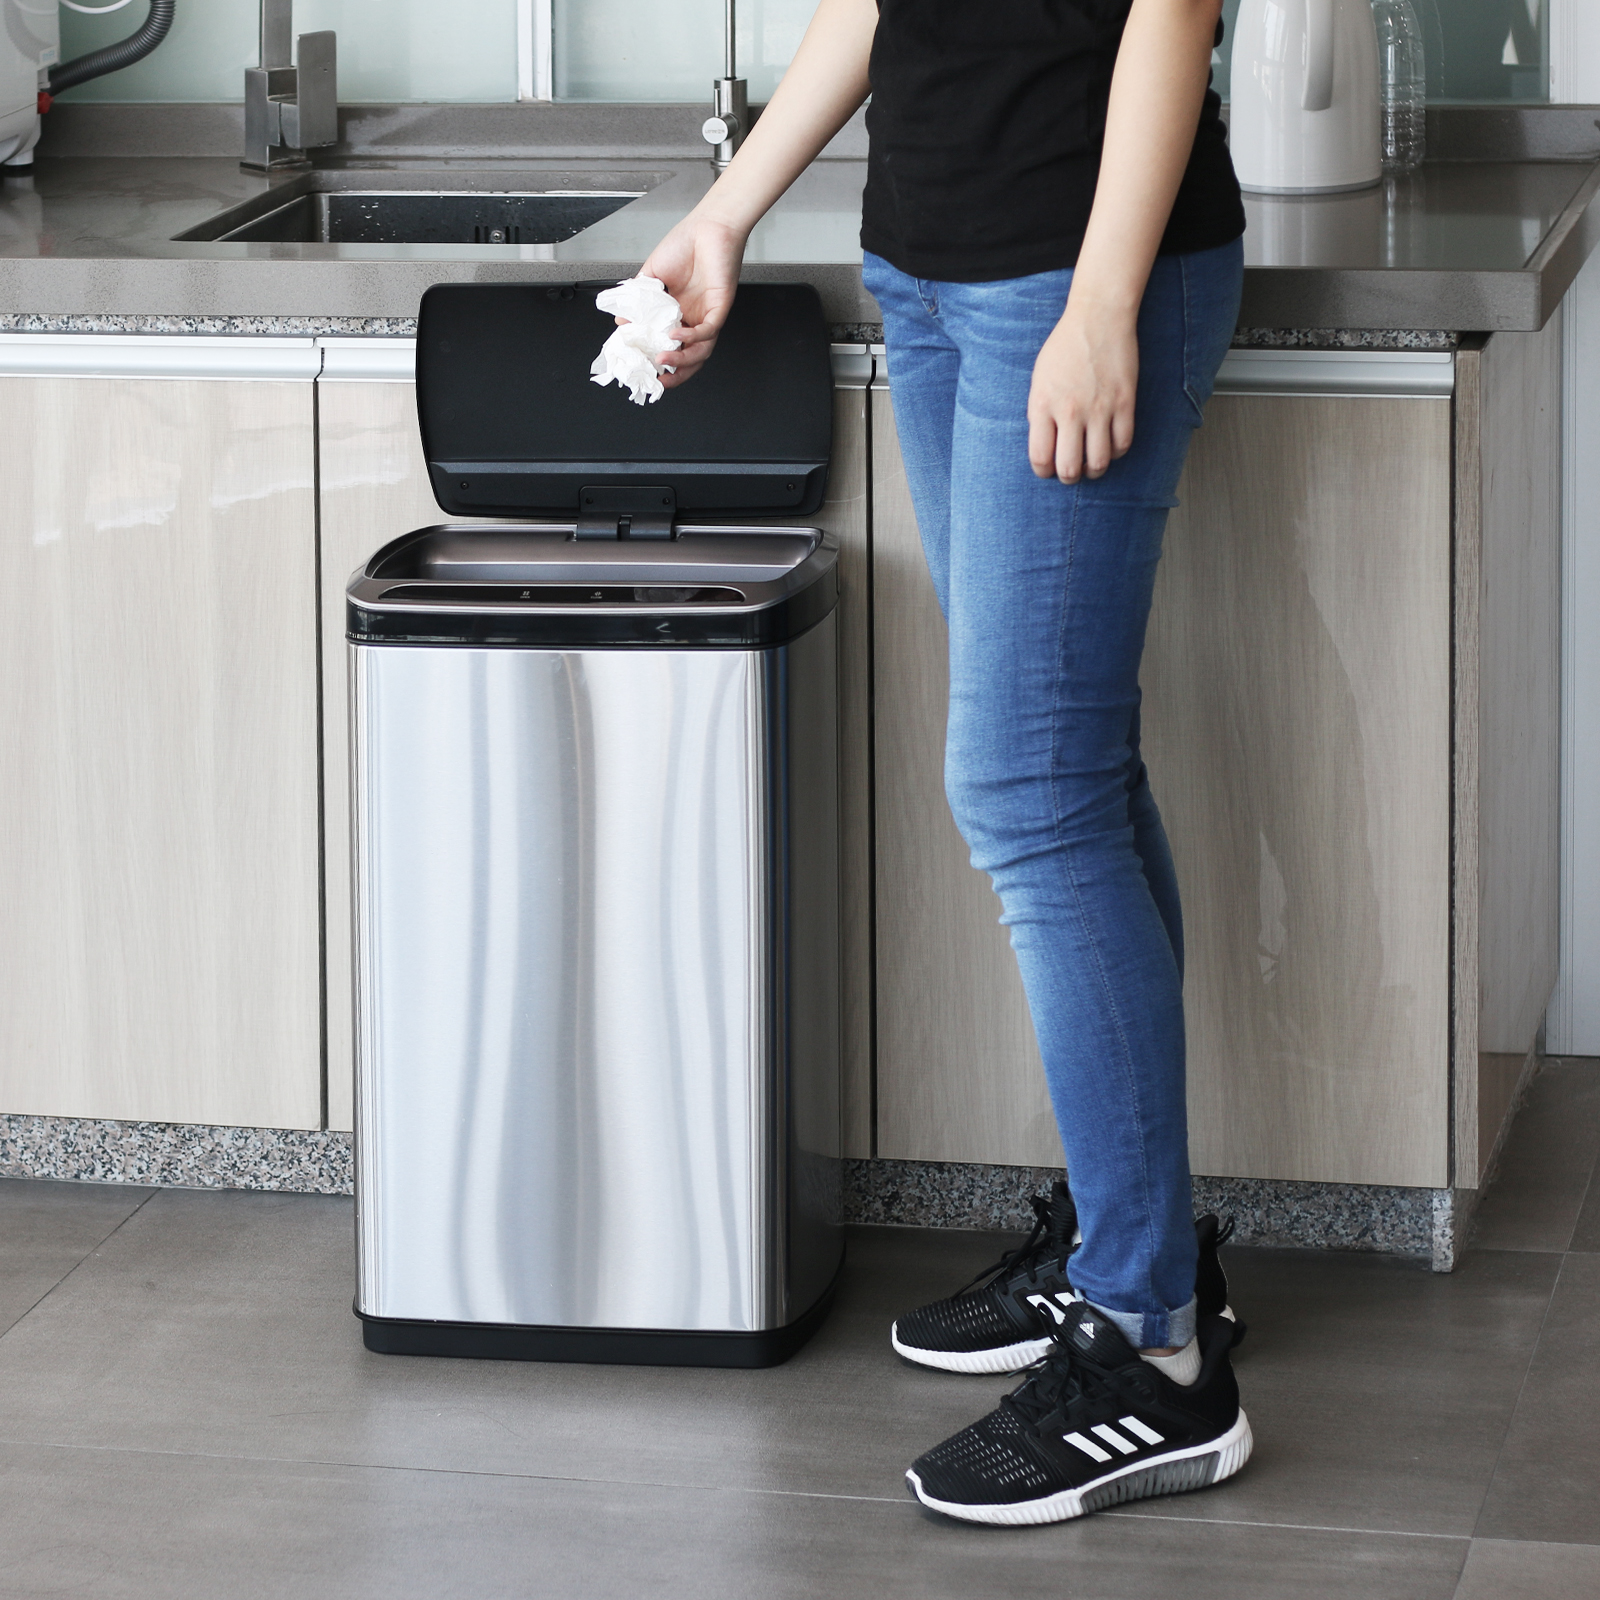 50L touchless trash can 13 gallon trash cans with sensor automatic sensing trash can stainless steel